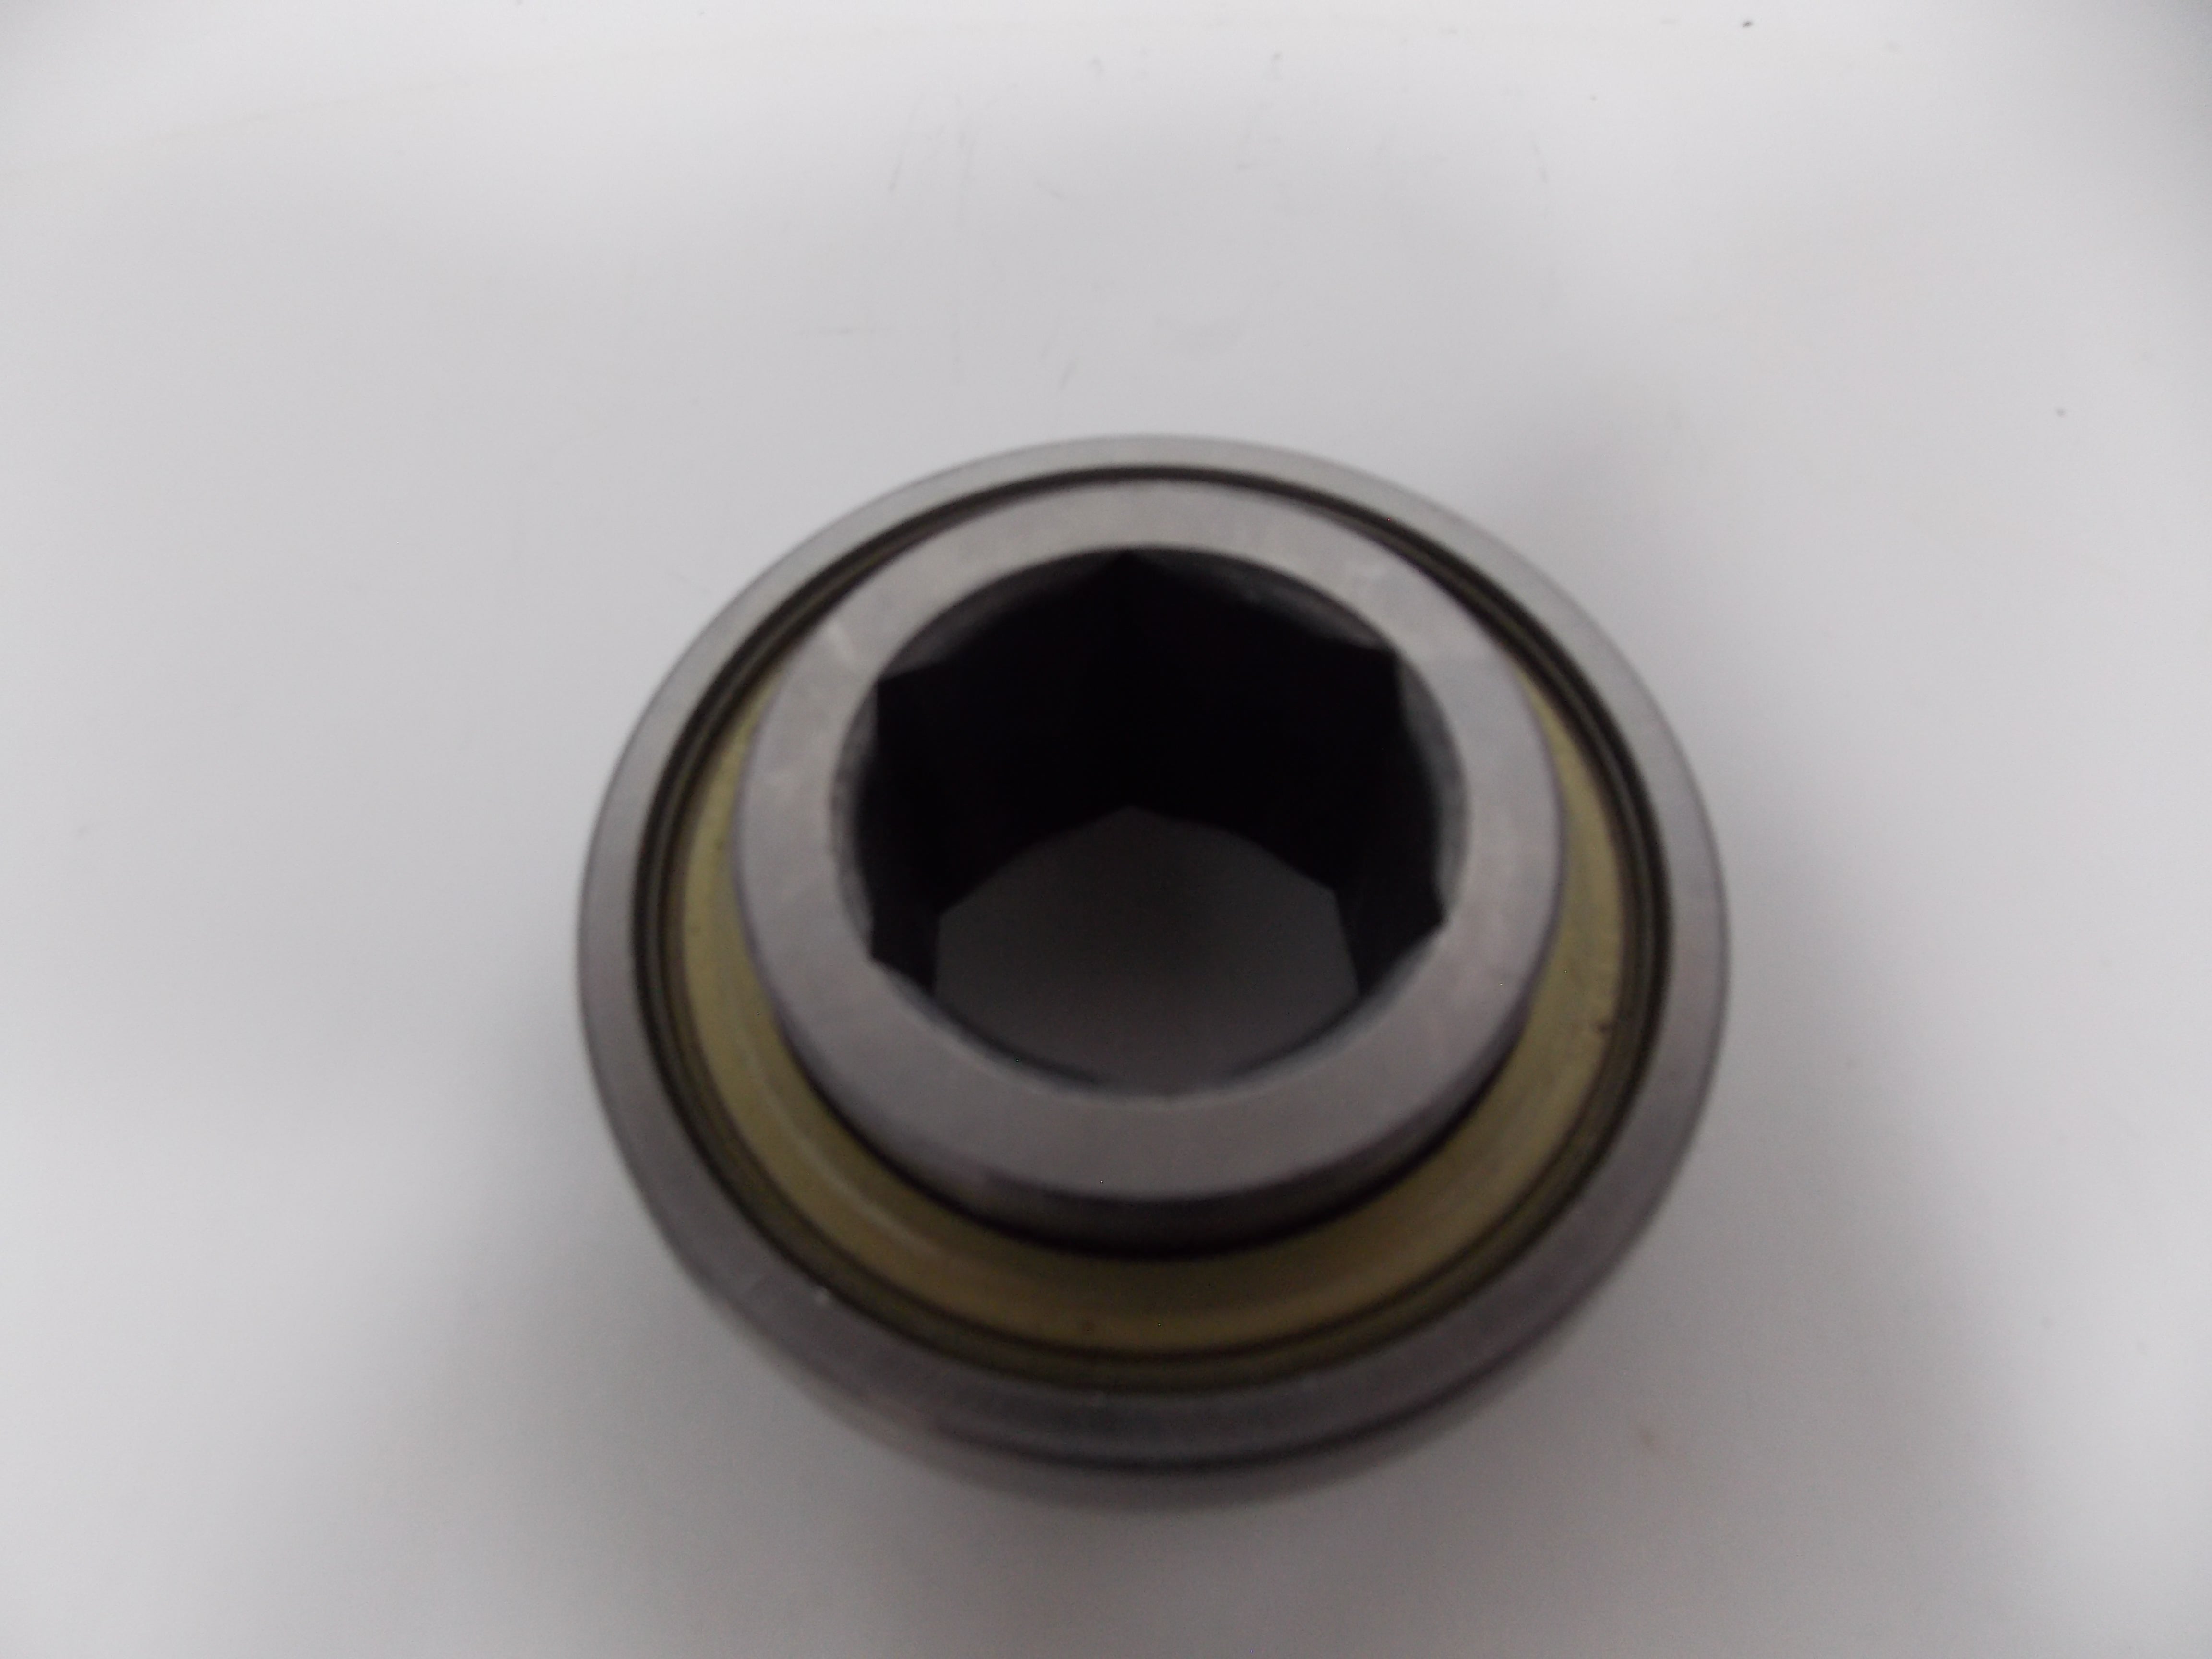 209KRRB2 Special AG Bearing 1.5" Hex Bore